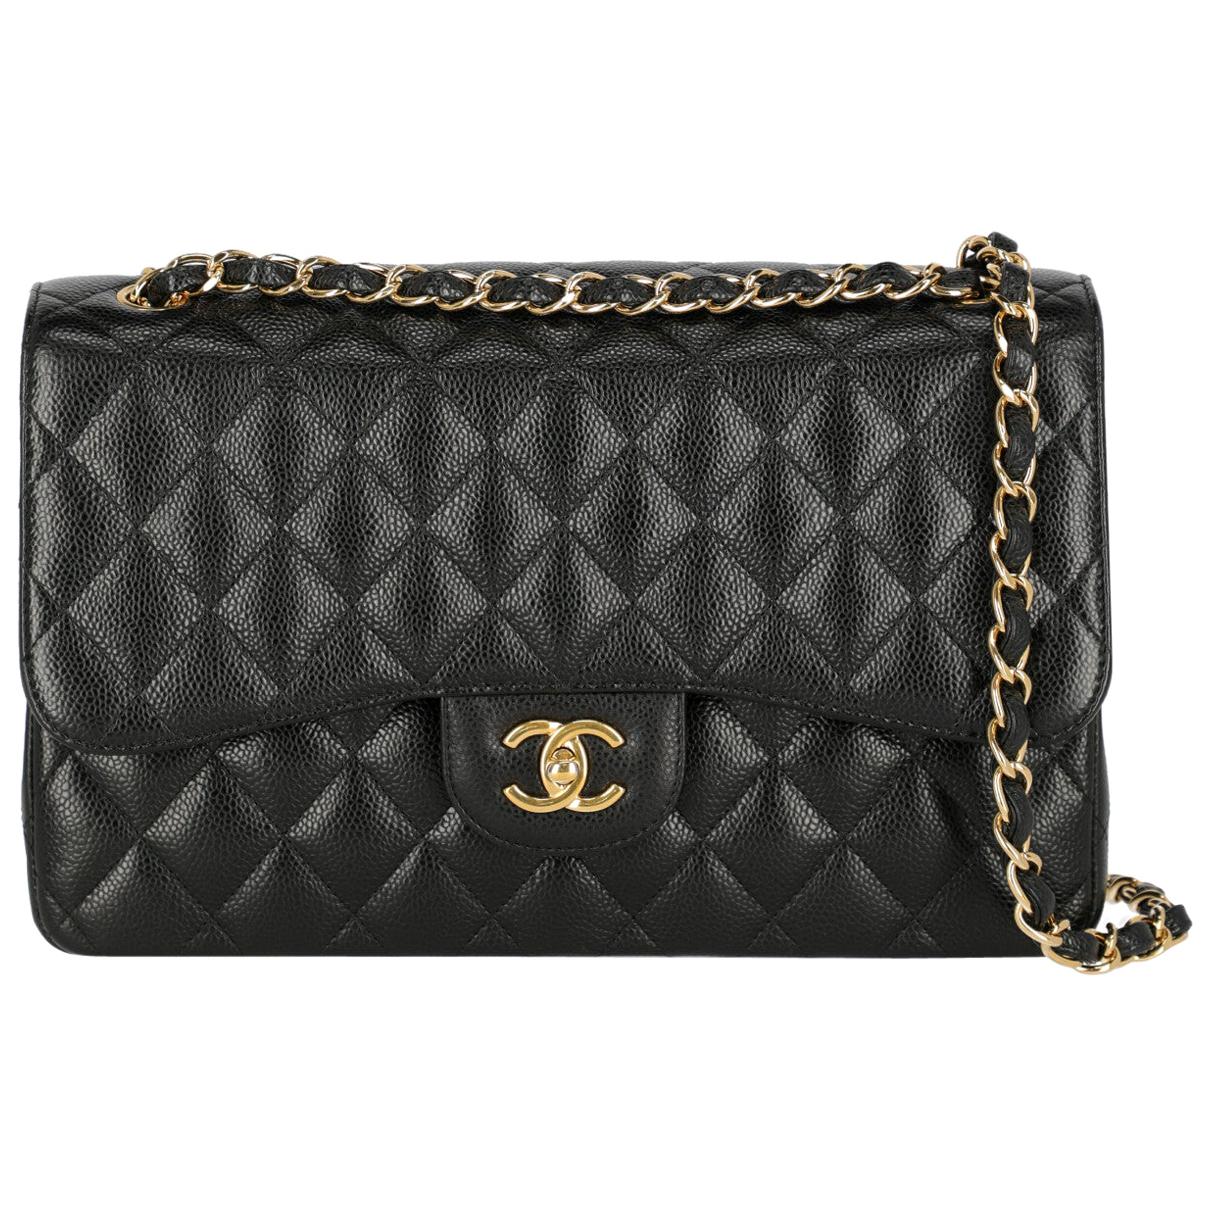 Chanel Women's Timeless Black Leather